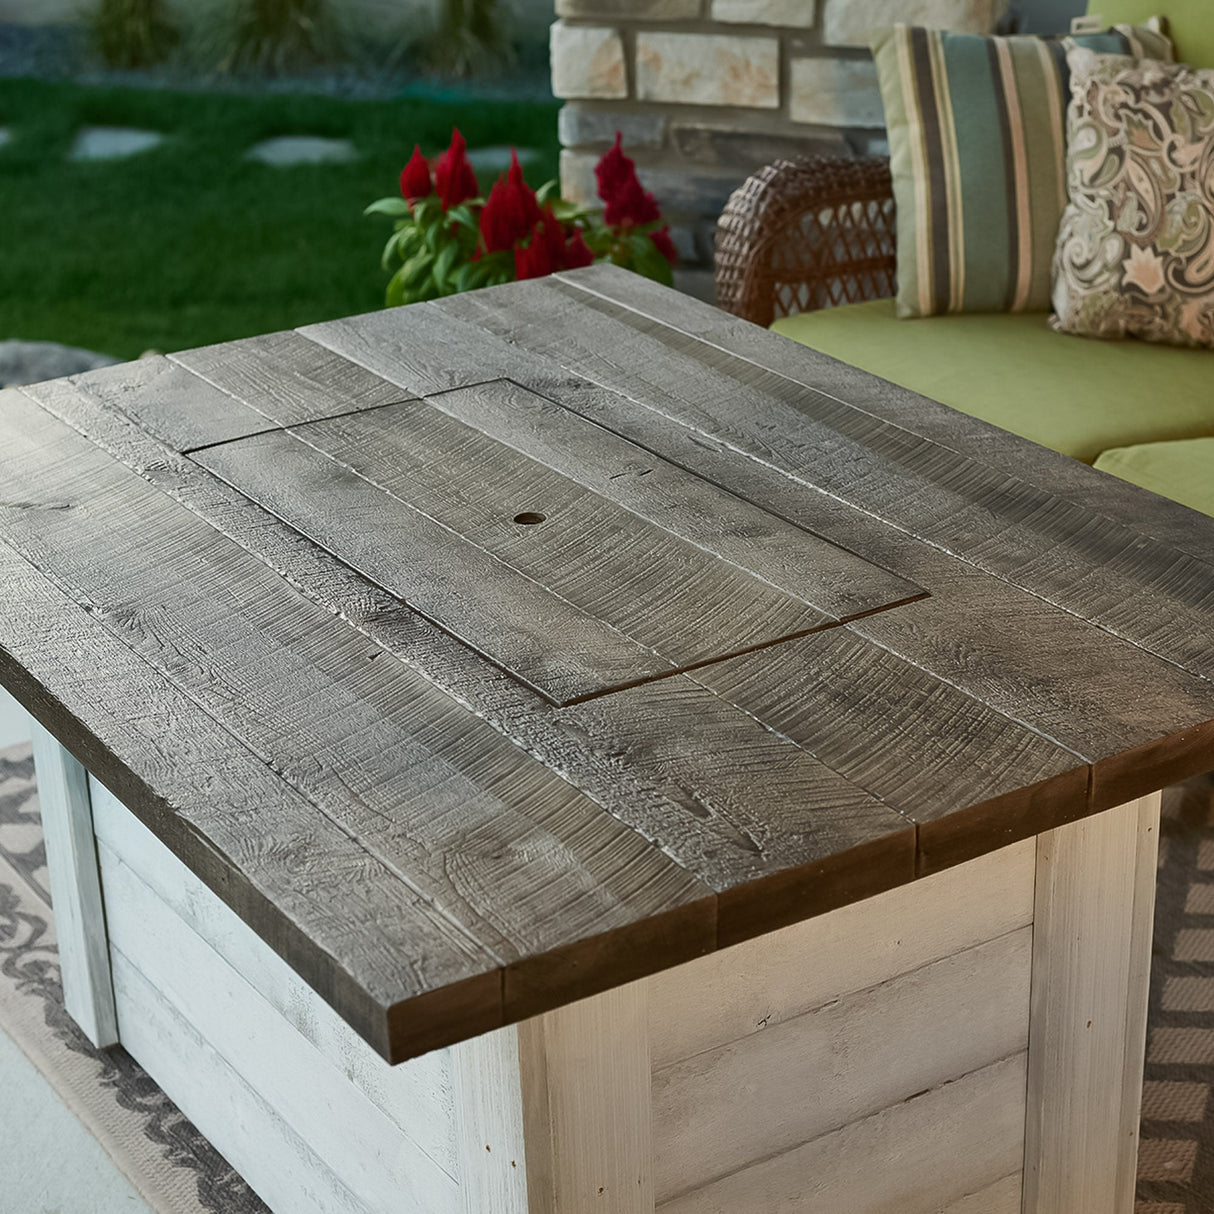 A cover placed on the Alcott Rectangular Gas Fire Pit Table while surrounded next to patio furniture